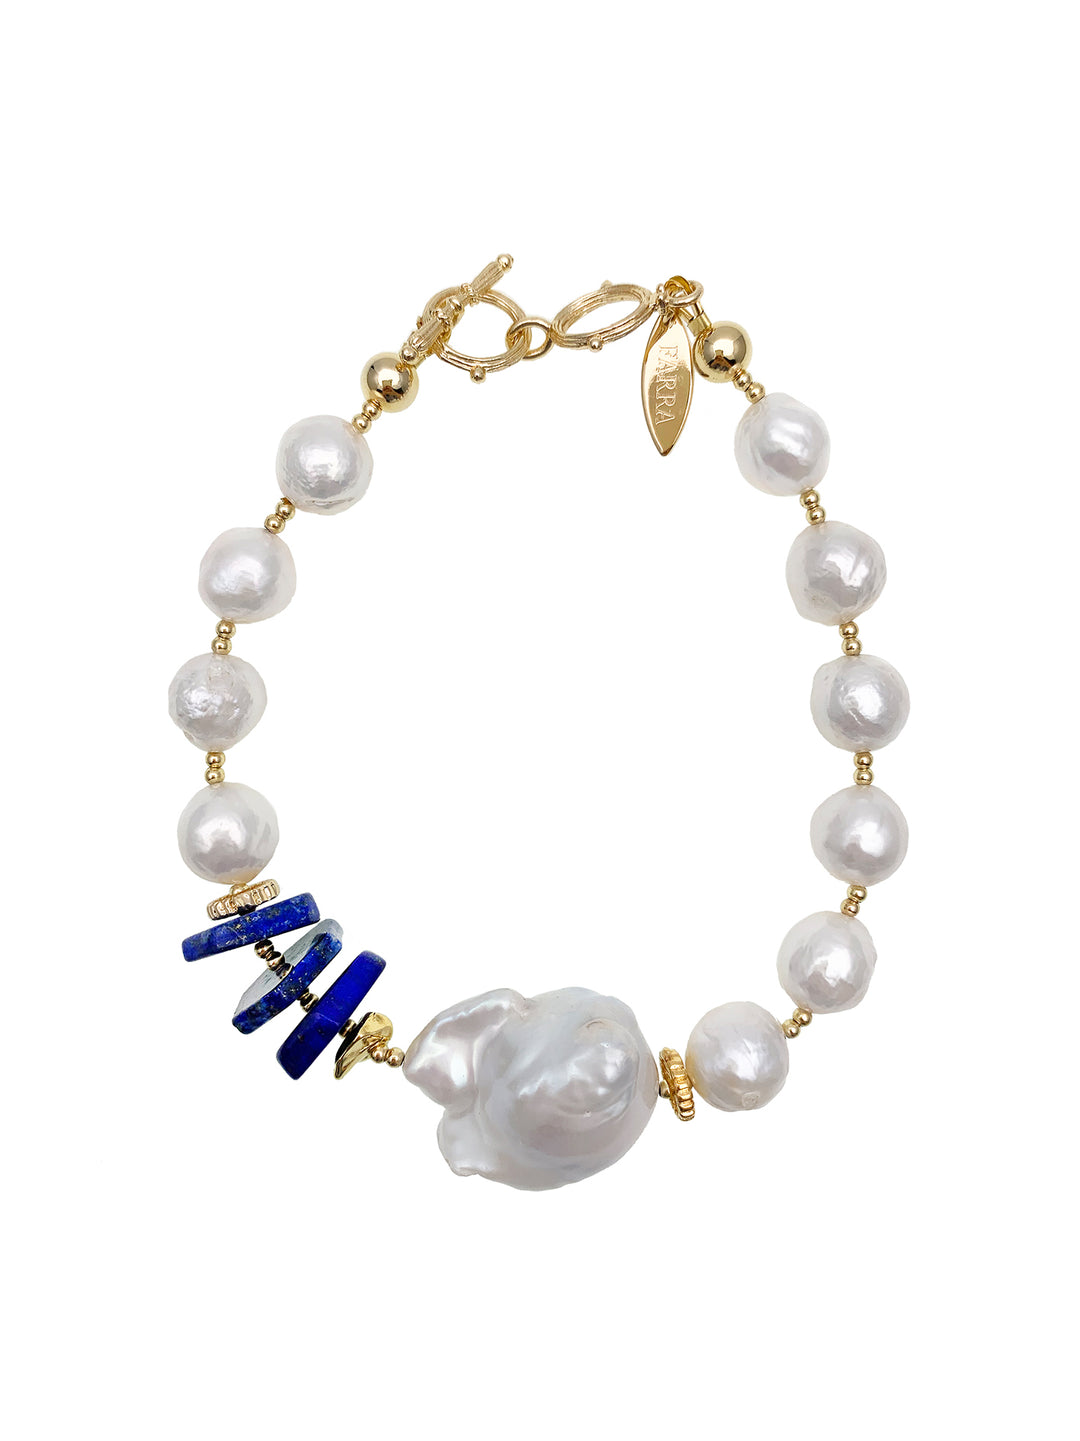 Freshwater Pearls With Lapis and Baroque Bracelet EB002 - FARRA